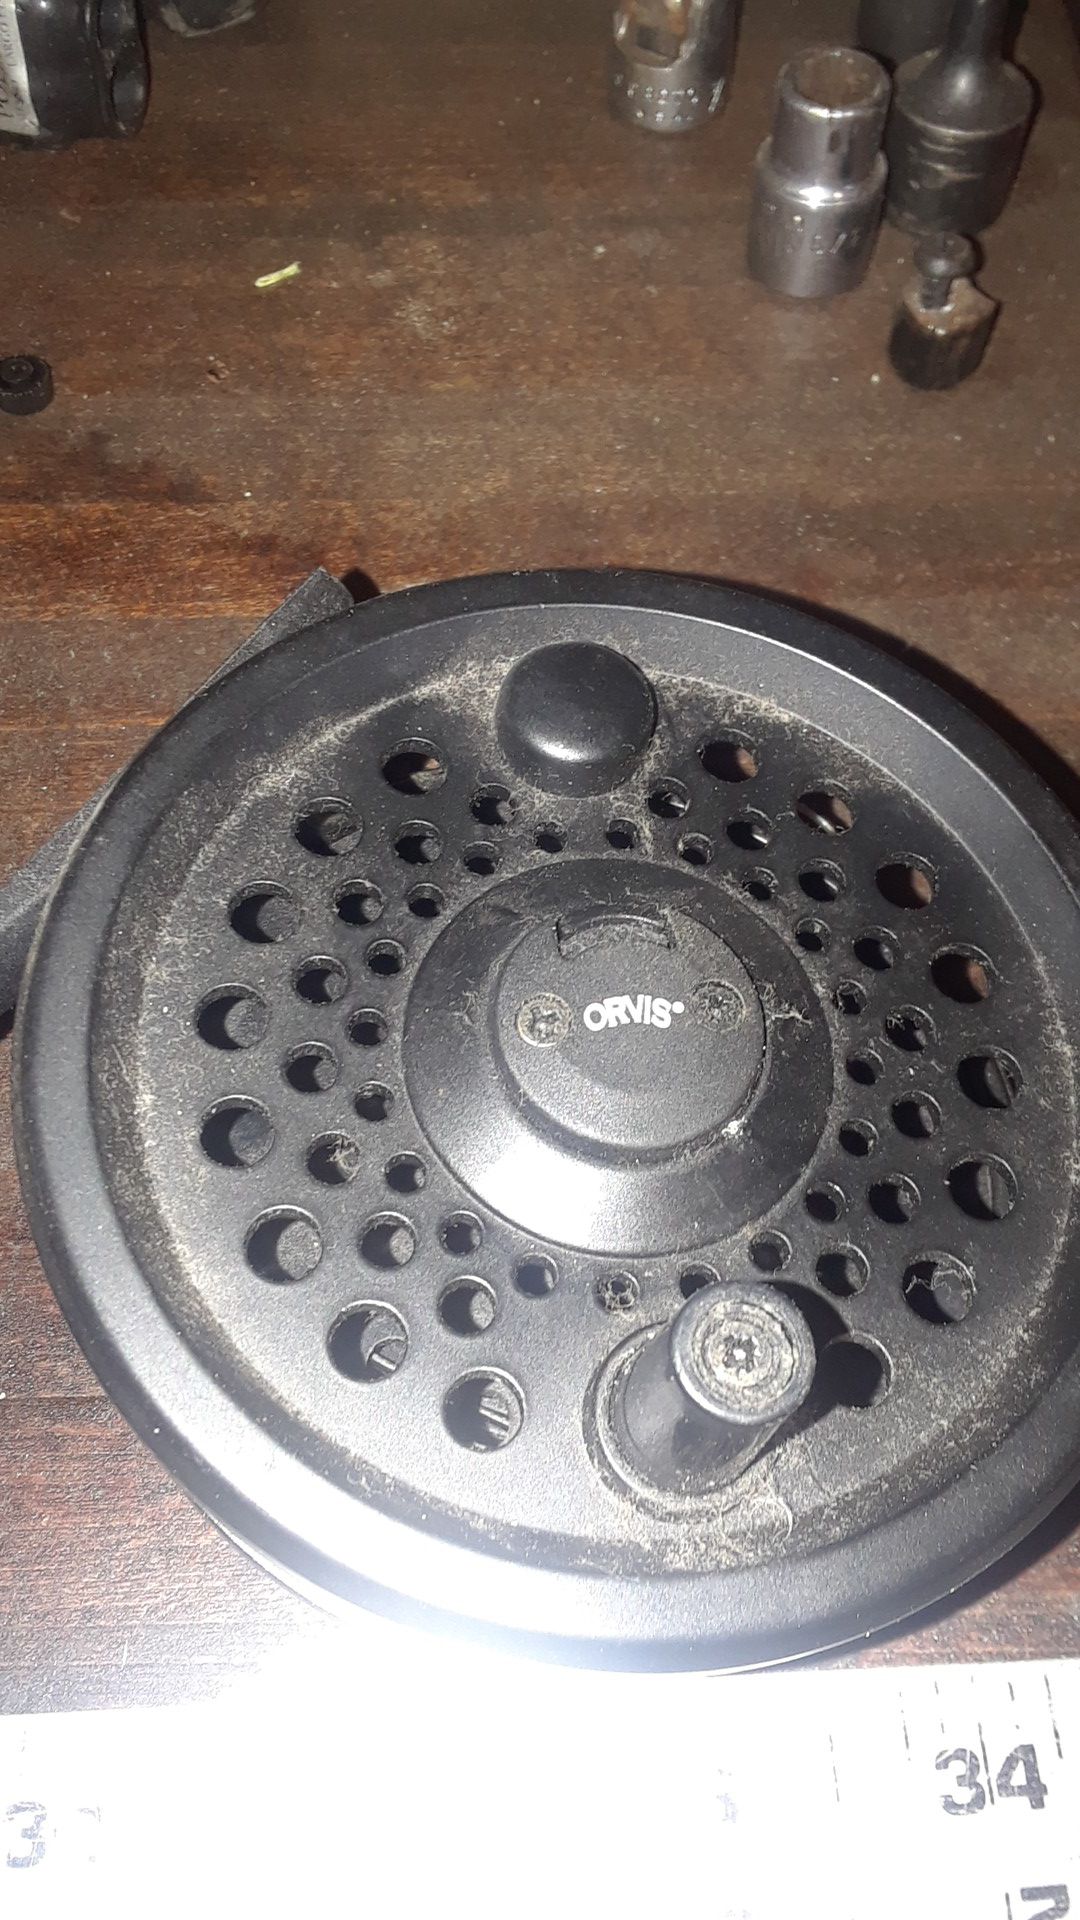 Orvis Clearwater classic IV fly reel for Sale in Tampa, FL - OfferUp